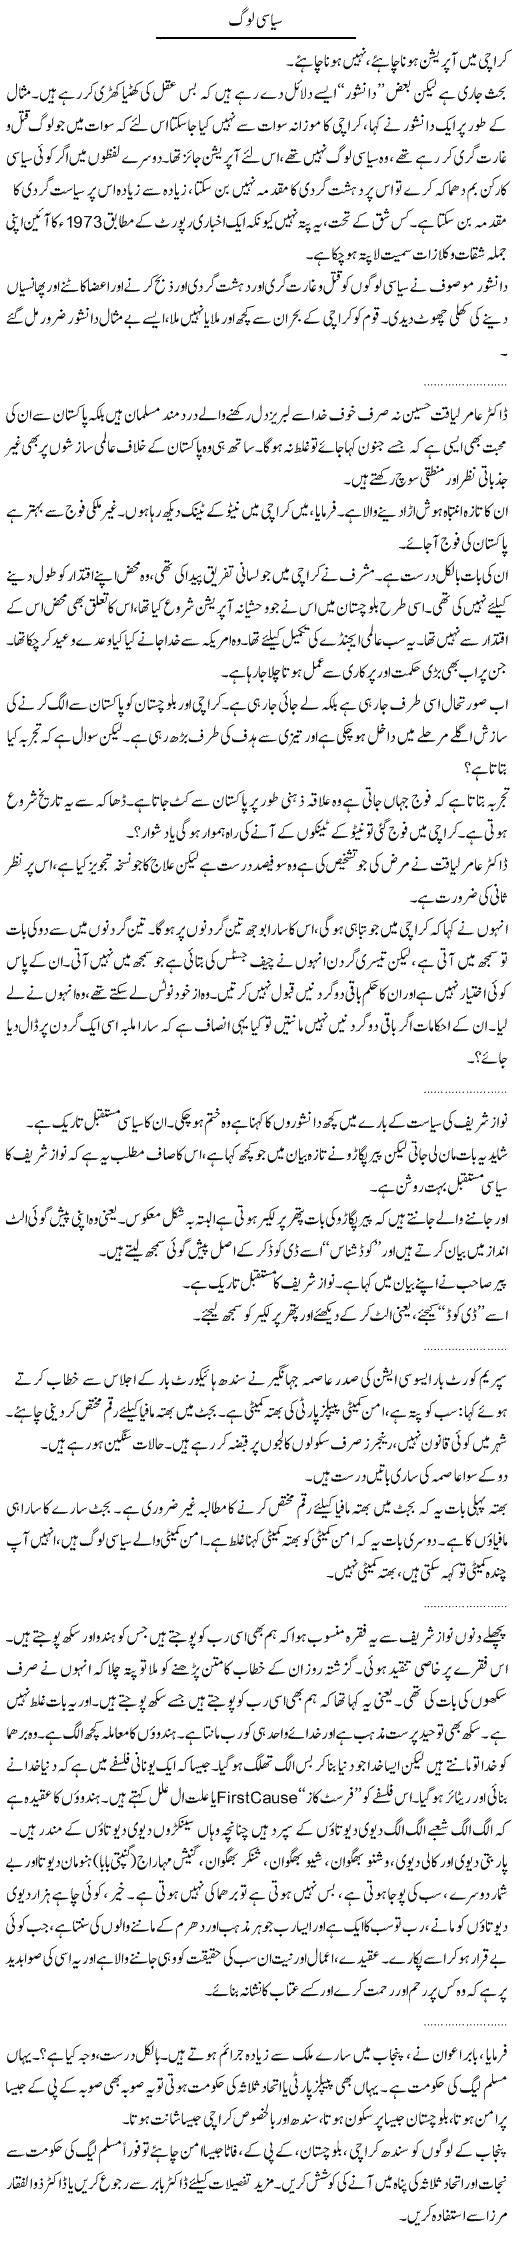 Karachi and Police Express Column Javed Chaudhry 26 August 2011